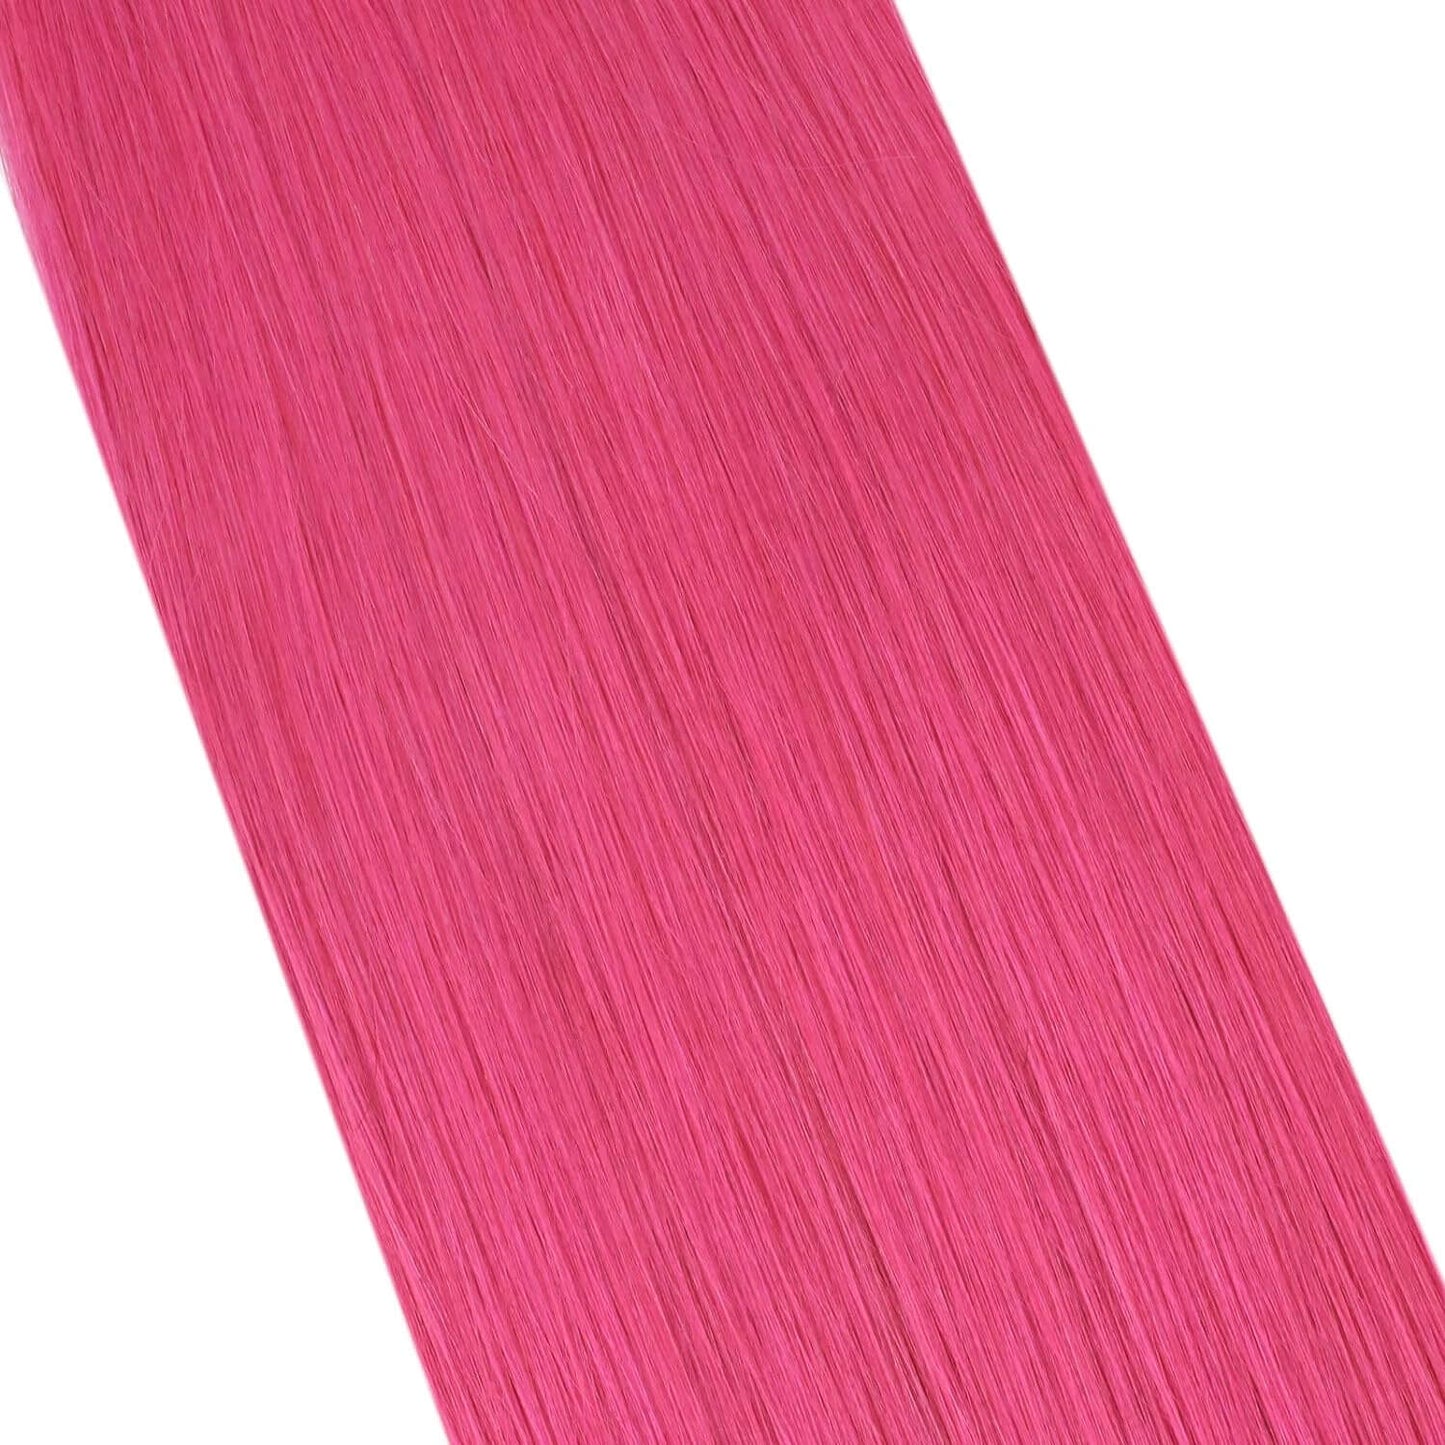 remy tape in hair extensions hot pink color